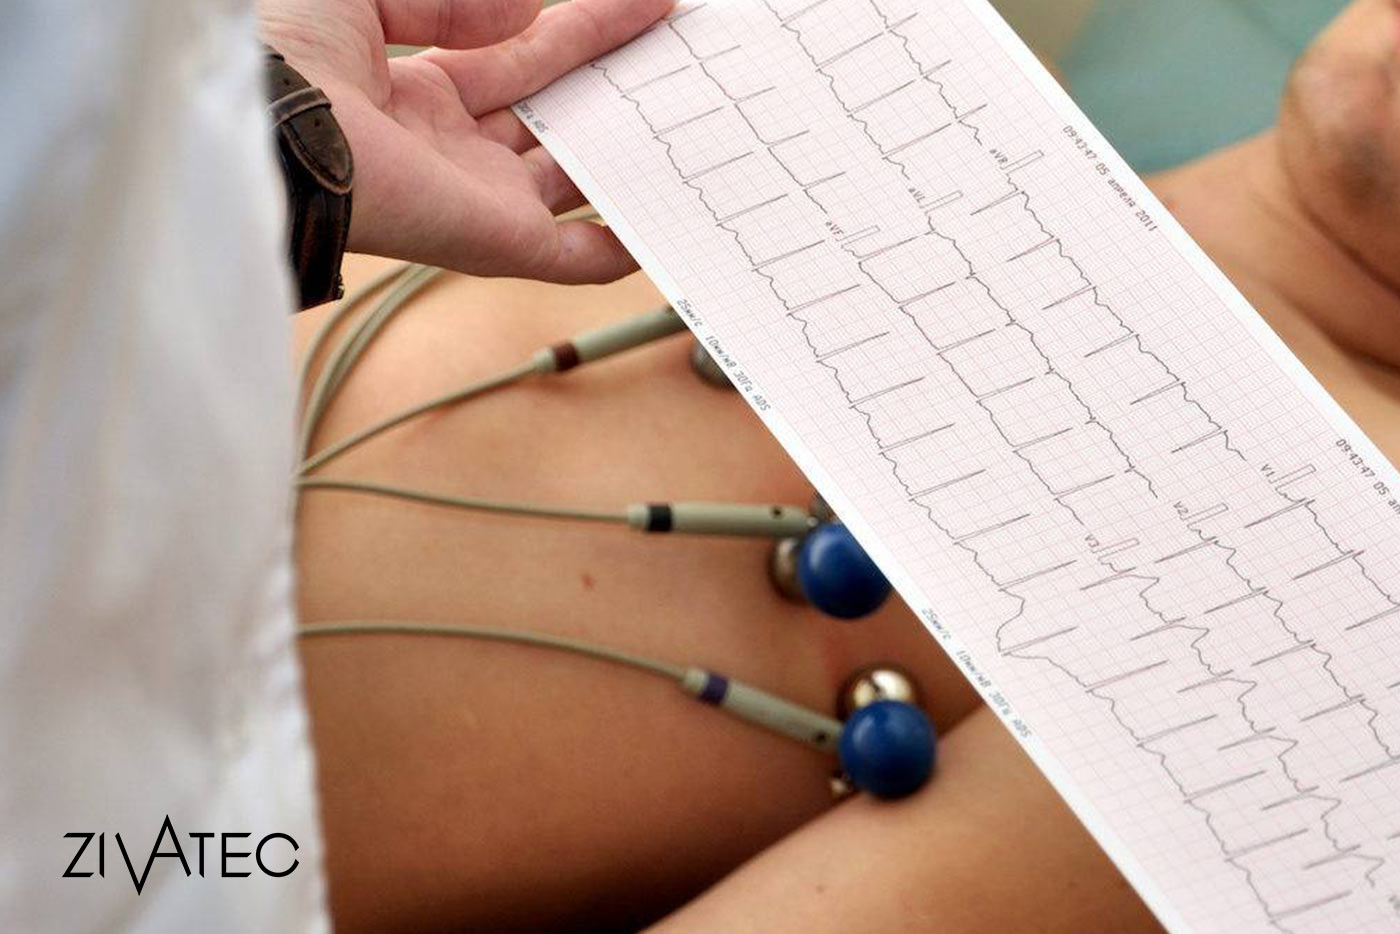 Review and comparison of types of electrocardiogram devices